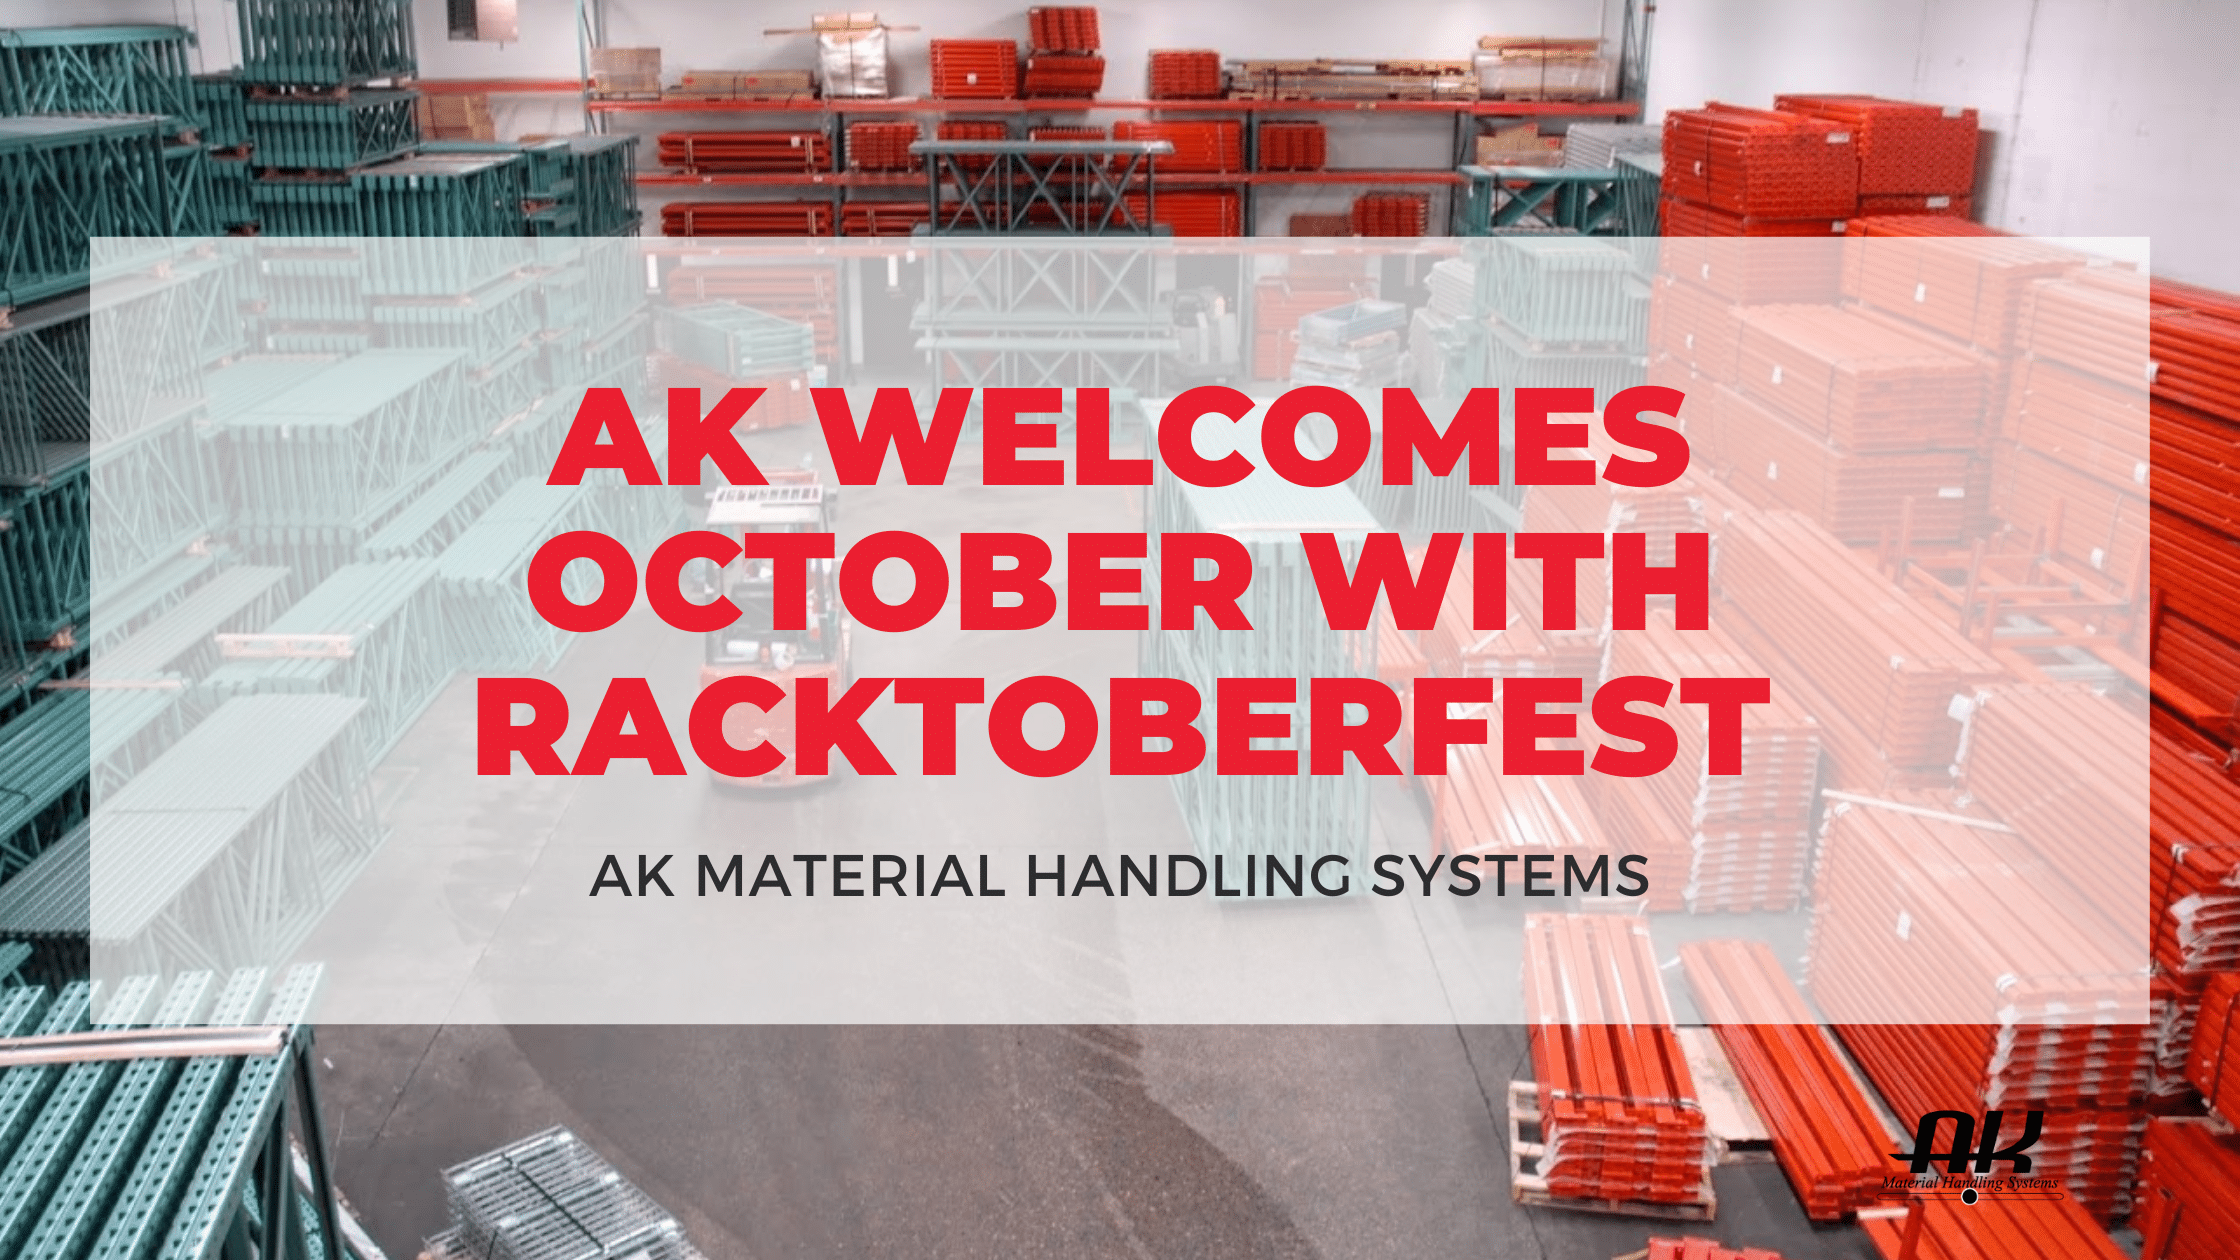 AK welcome October with racktoberfest.